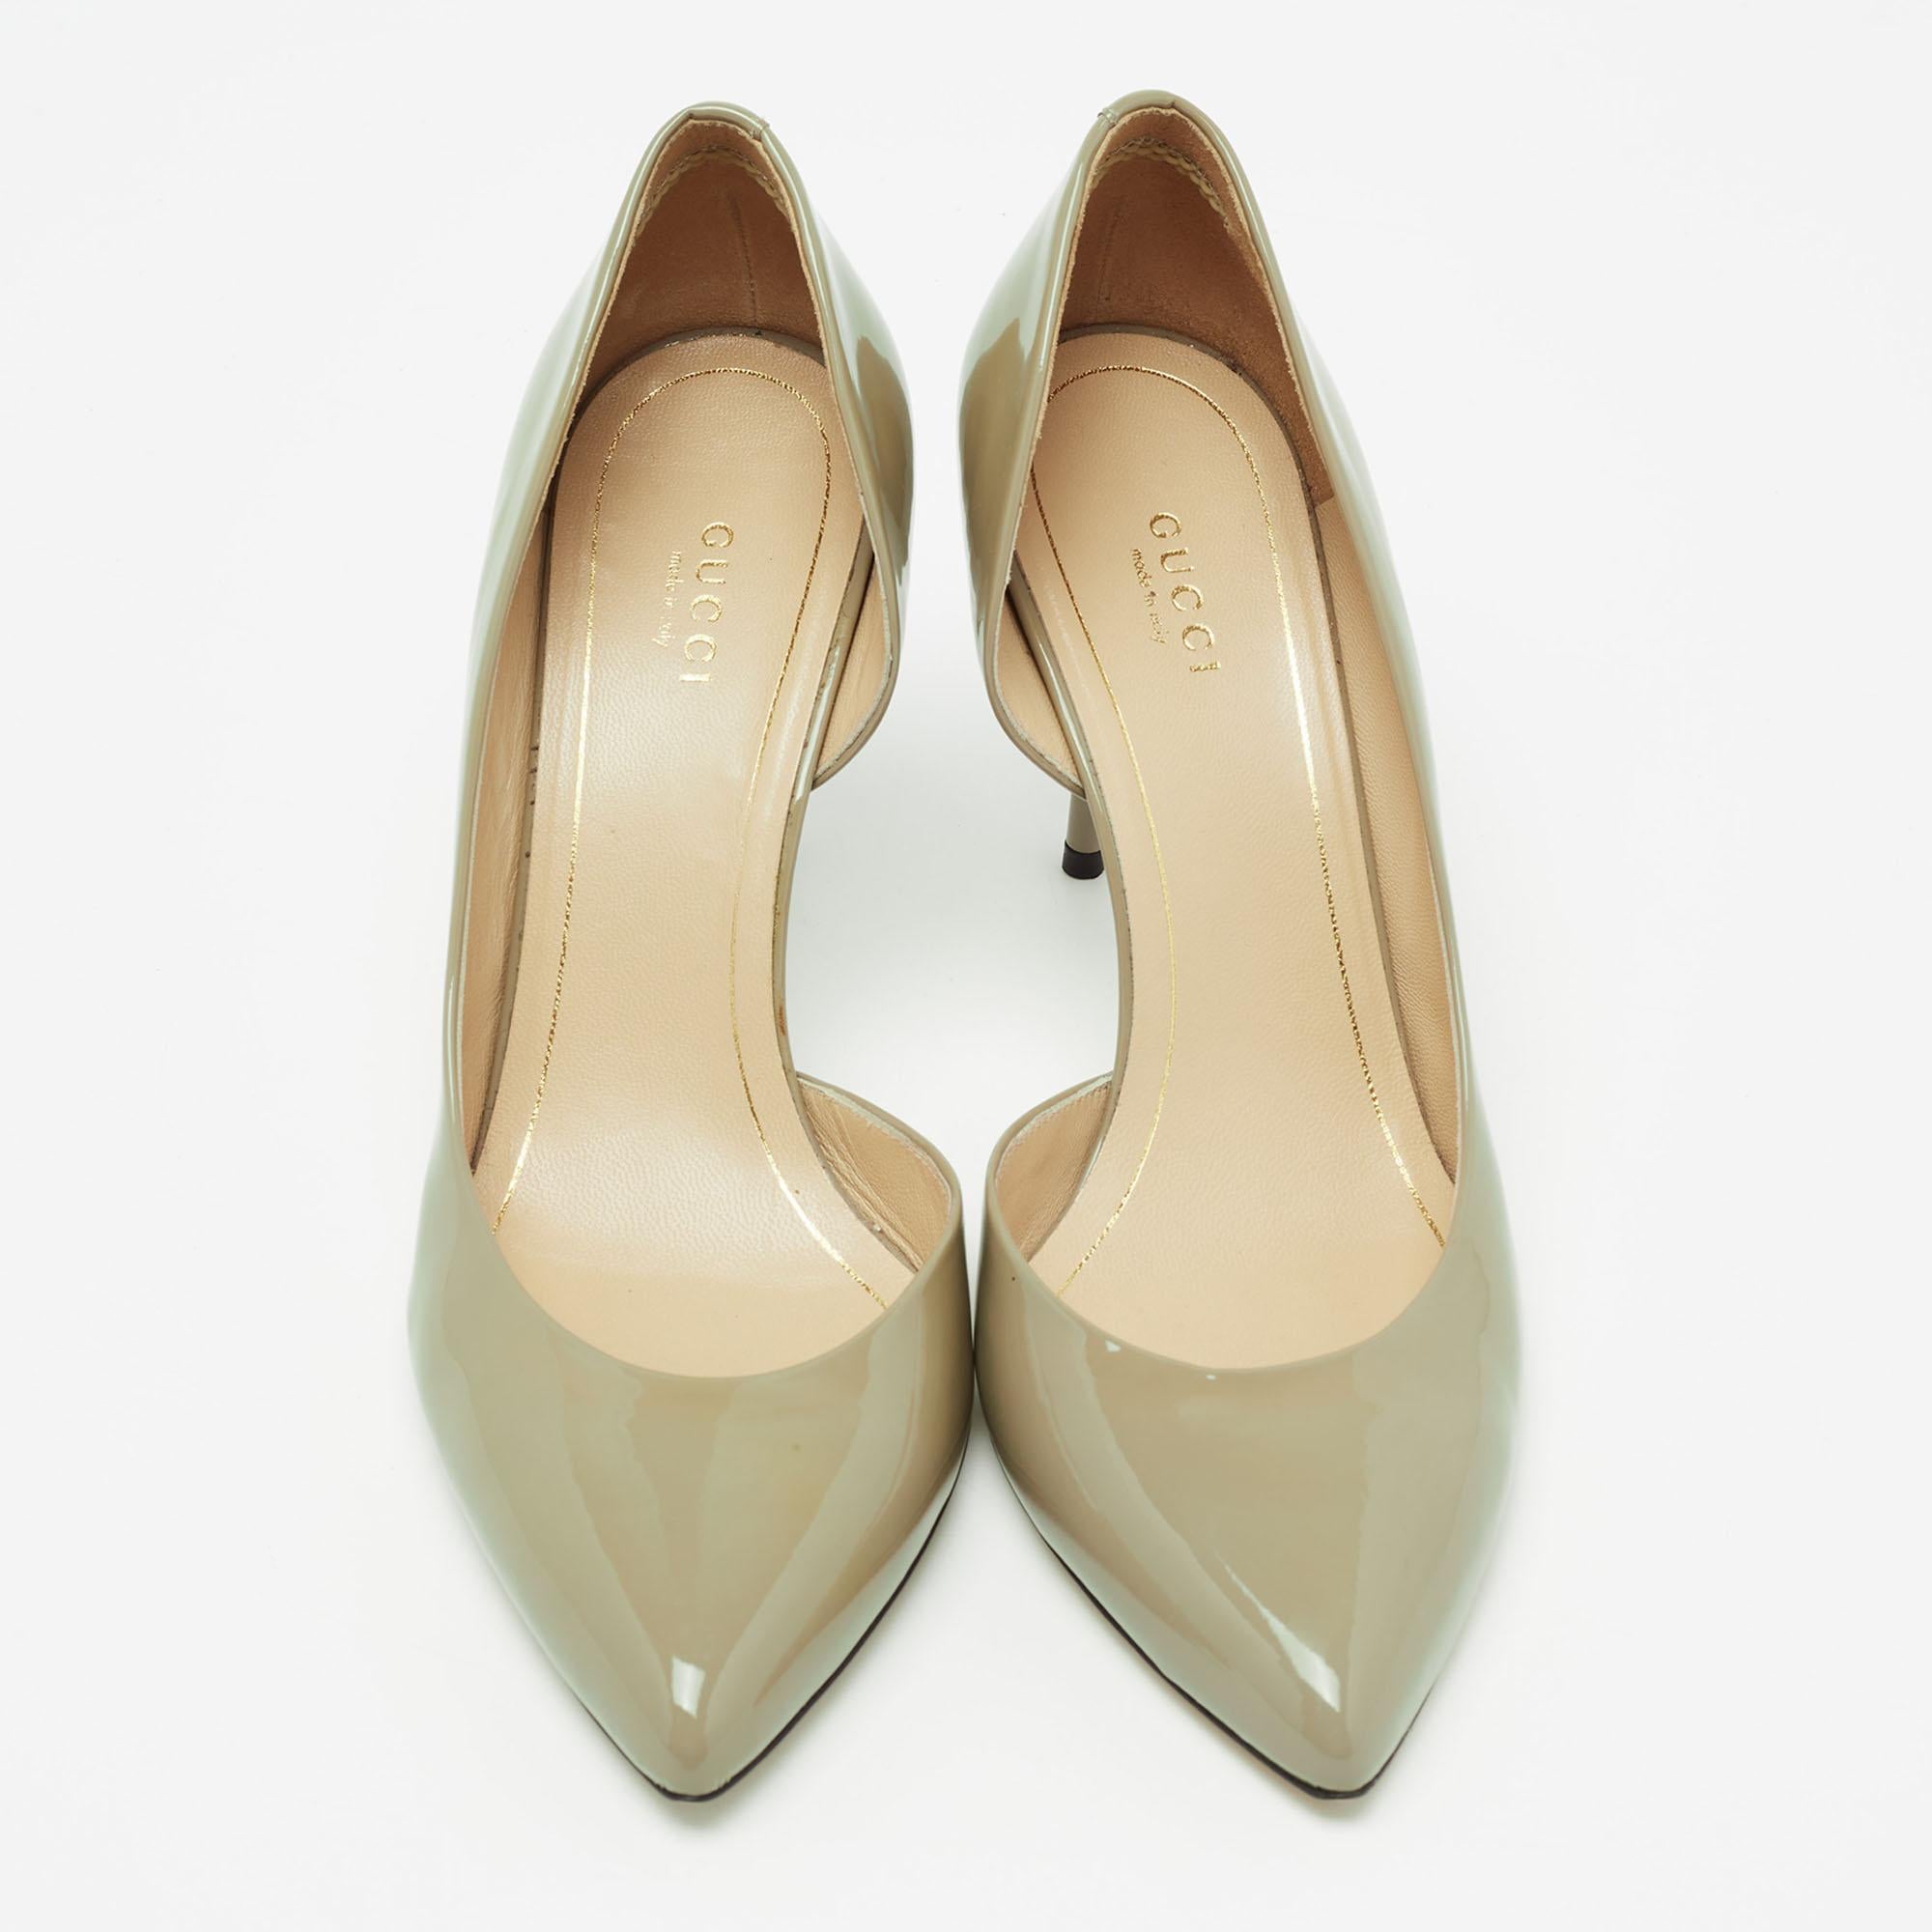 The expertly placed d'Orsay cut reflects the artistic construction of this pair of Gucci pumps. Made from patent leather, it is elegantly raised on 9cm heels and features leather insoles, covered counters, and comfortable soles.

Includes: Original